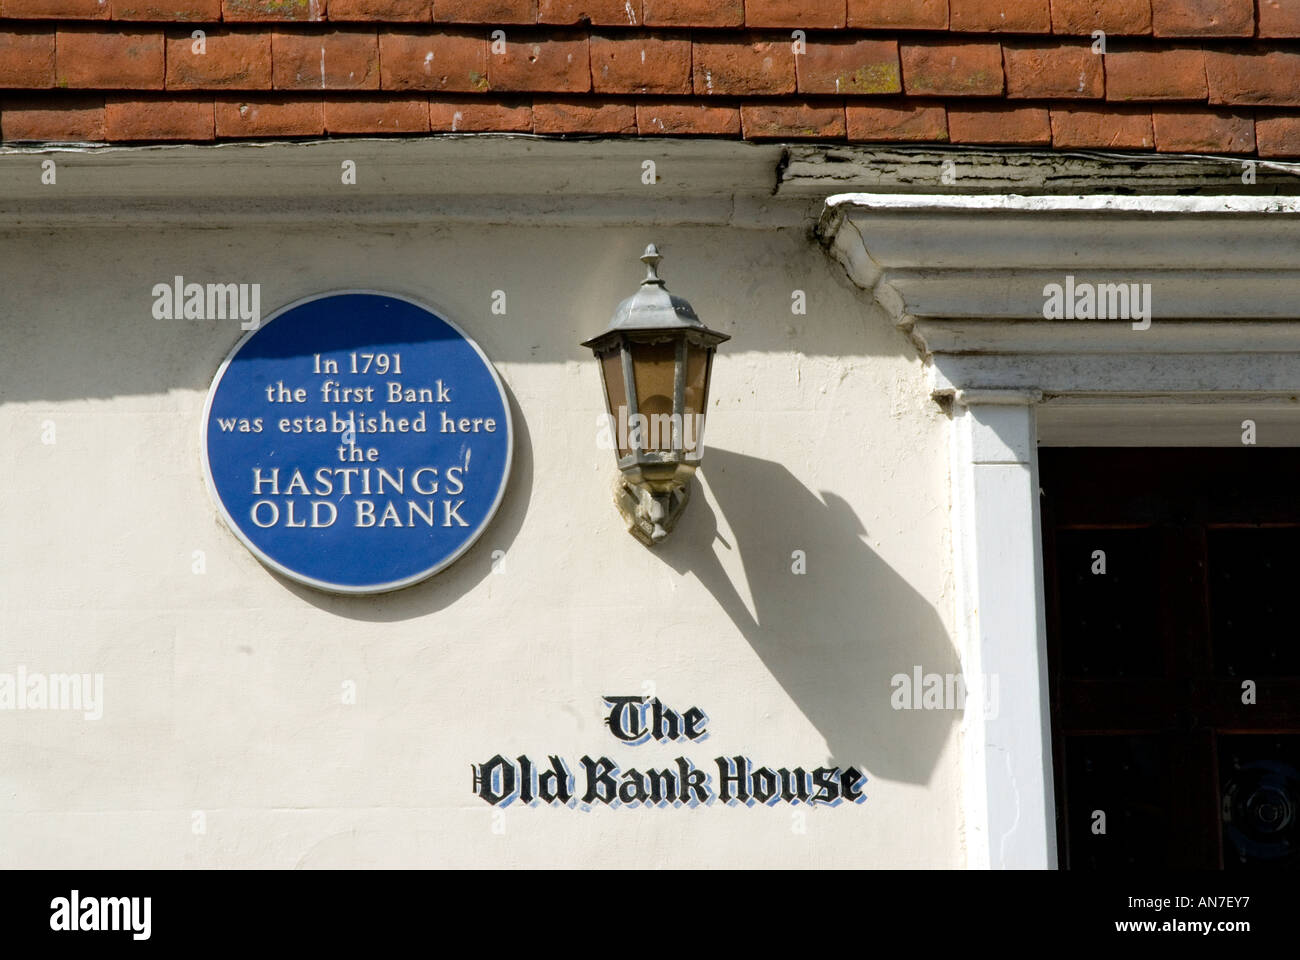 The Old Bank House High Street Hastings Old Town East Sussex south coast England Britain UK Europe EU Stock Photo